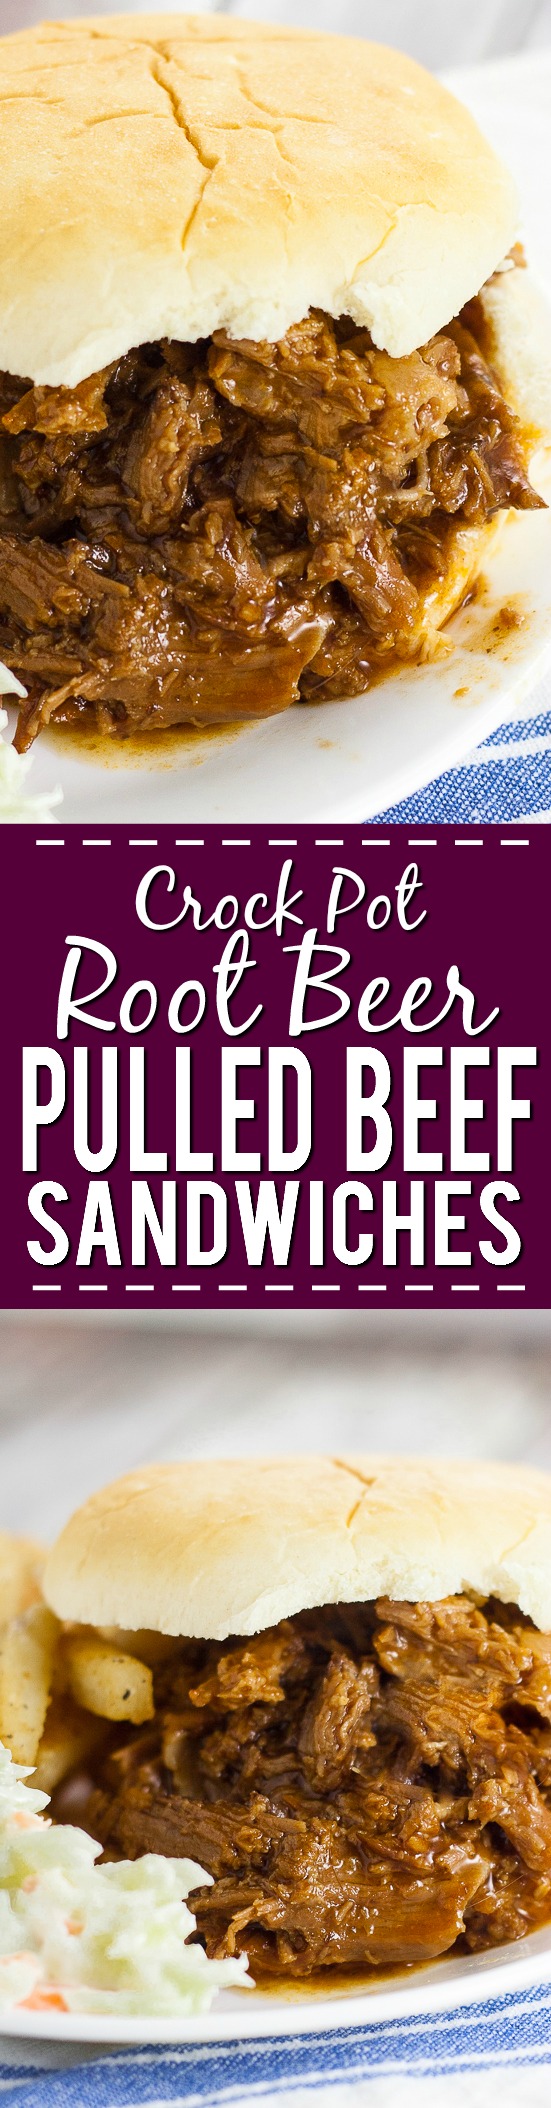 Crock Pot Root Beer Pulled Beef Sandwiches recipe - A 5 ingredient fix-it-and-forget-it slow cooker dinner, this Crock Pot Root Beer Pulled Beef recipe has the perfect combination of tangy sweetness and takes just minutes to throw together! Easy slow cooker recipe perfect for family